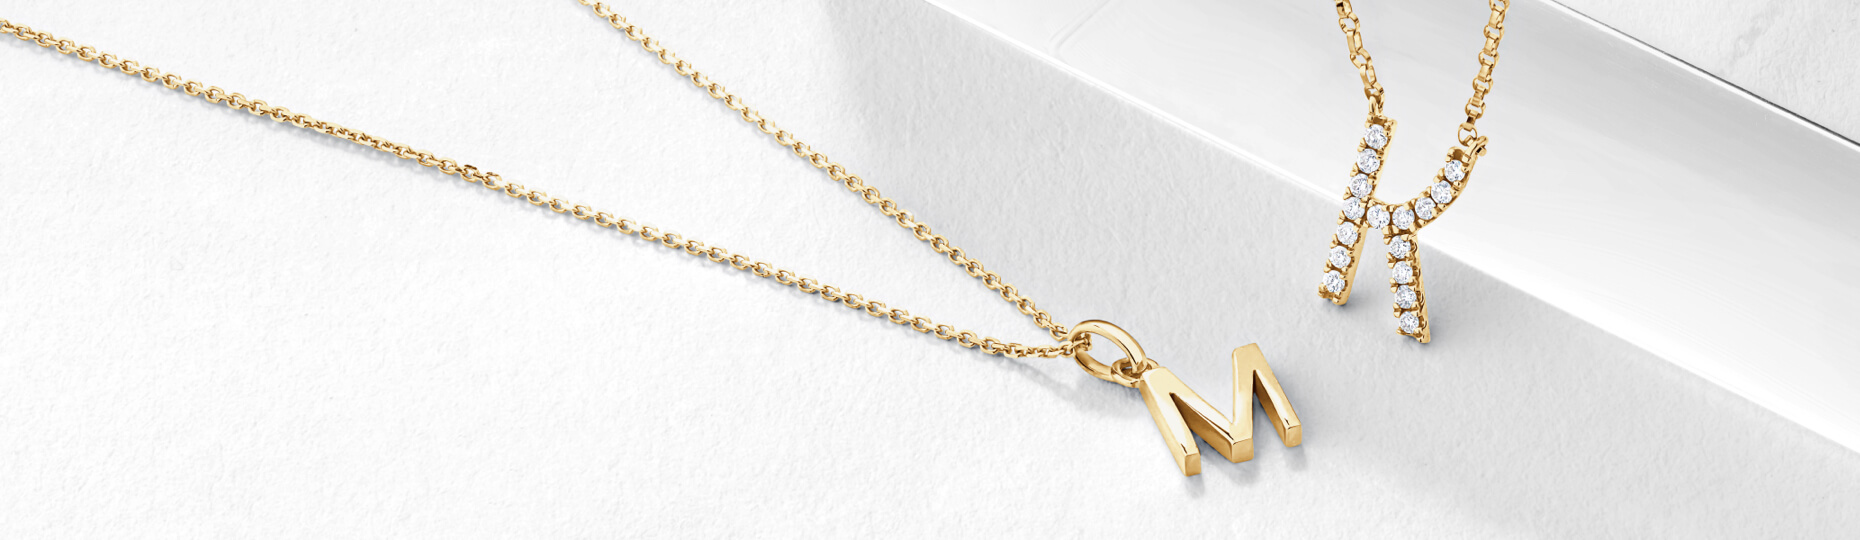 Initial Jewellery Gifts | Shop Initial Necklaces at Michael Hill